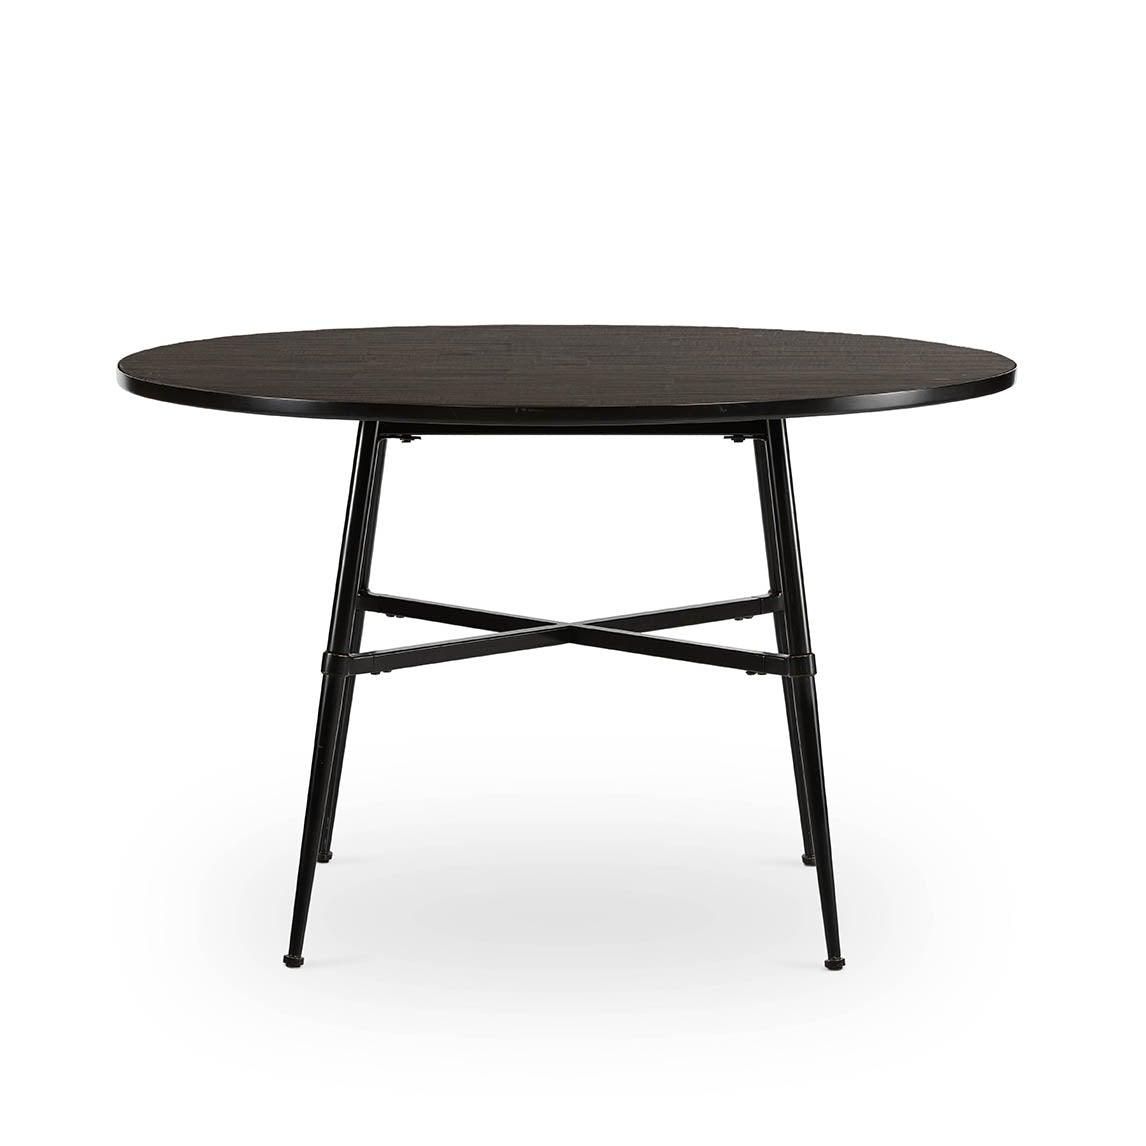 IVANA DINING TABLE - Reimagine Designs - dining table, new